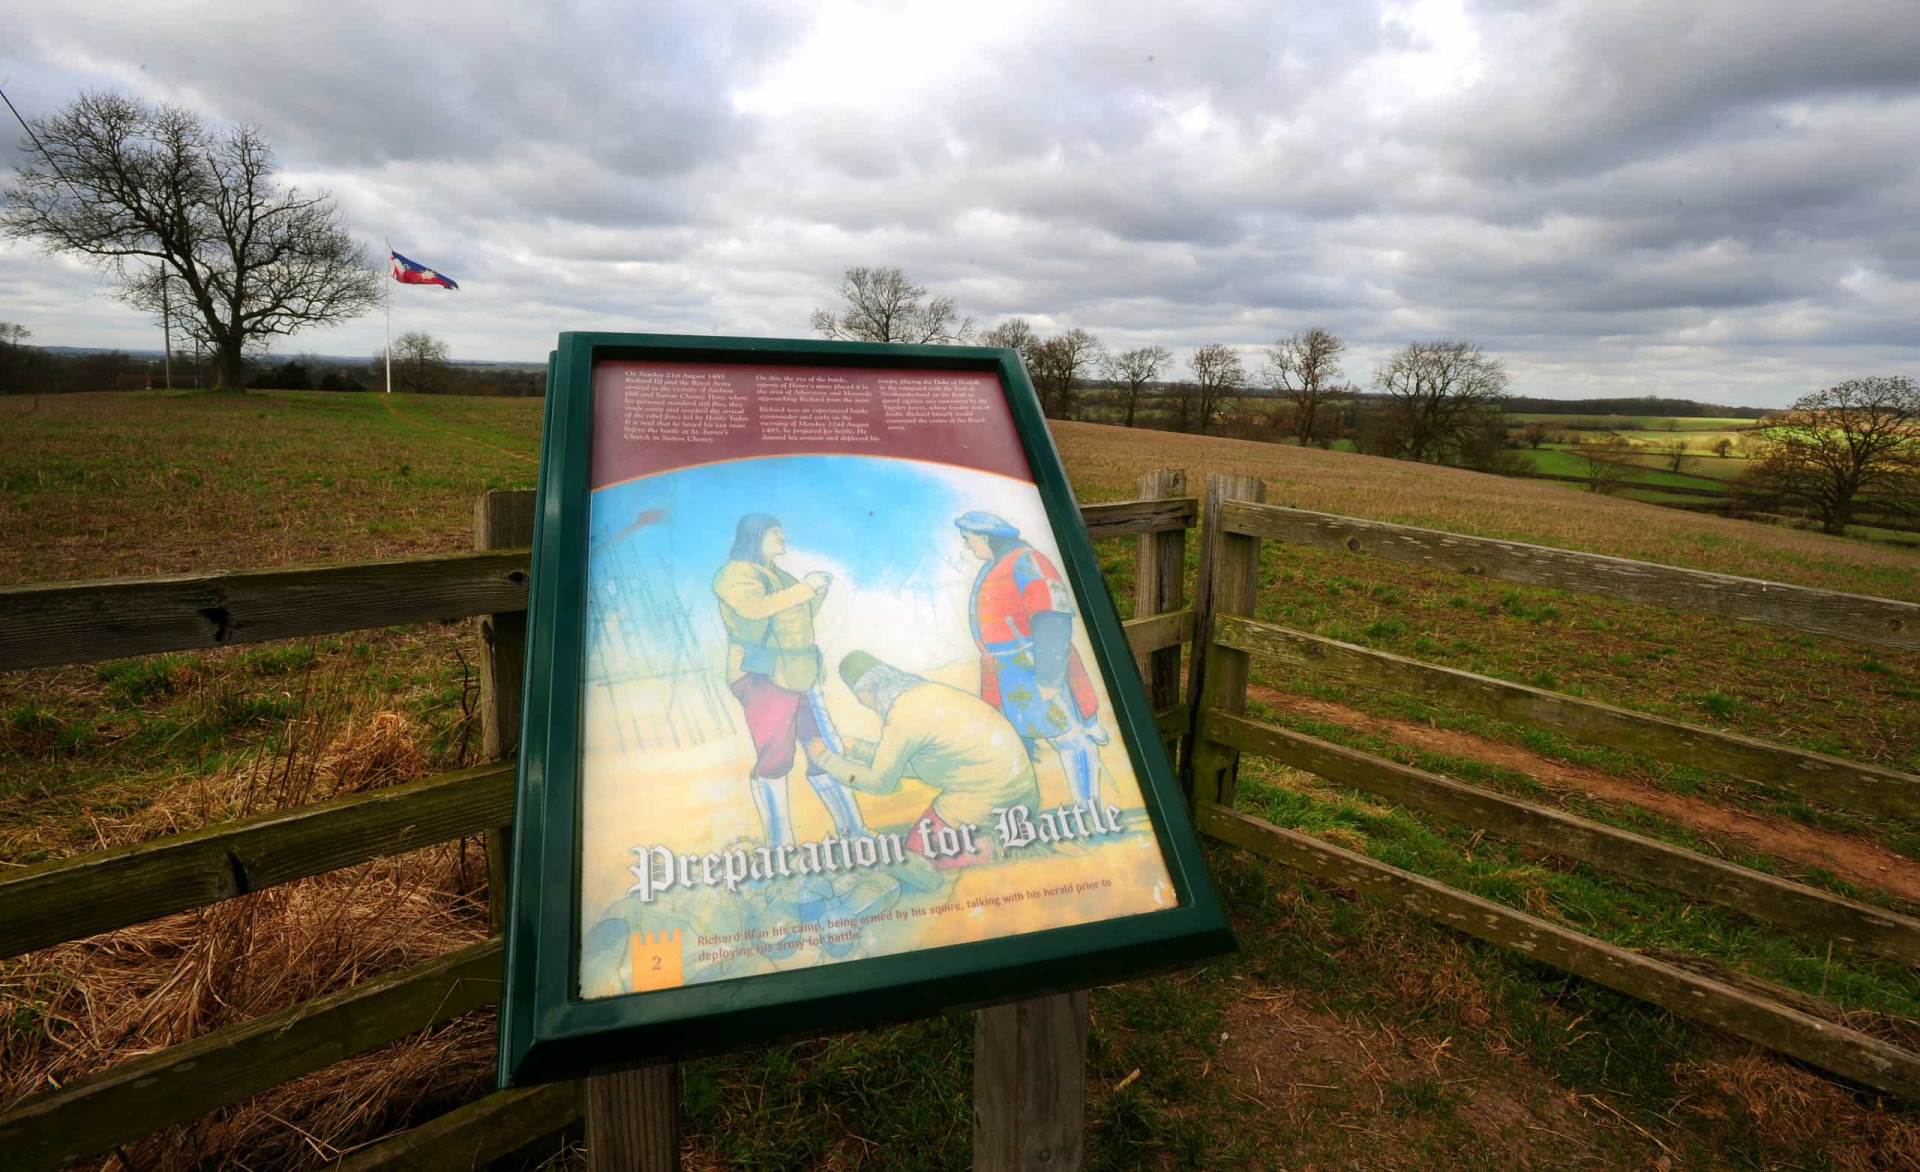 <p>Also known as the Battle of Bosworth Field, this was the last significant engagement of the War of the Roses, a series of 15th-century English civil wars that lasted a protracted 32 years. Bosworth took place on August 22, 1485 near Ambion Hill in Leicestershire. The battlefield is clearly way signed.</p><p><a href="https://www.msn.com/en-za/community/channel/vid-7xx8mnucu55yw63we9va2gwr7uihbxwc68fxqp25x6tg4ftibpra?cvid=94631541bc0f4f89bfd59158d696ad7e">Follow us and access great exclusive content every day</a></p>